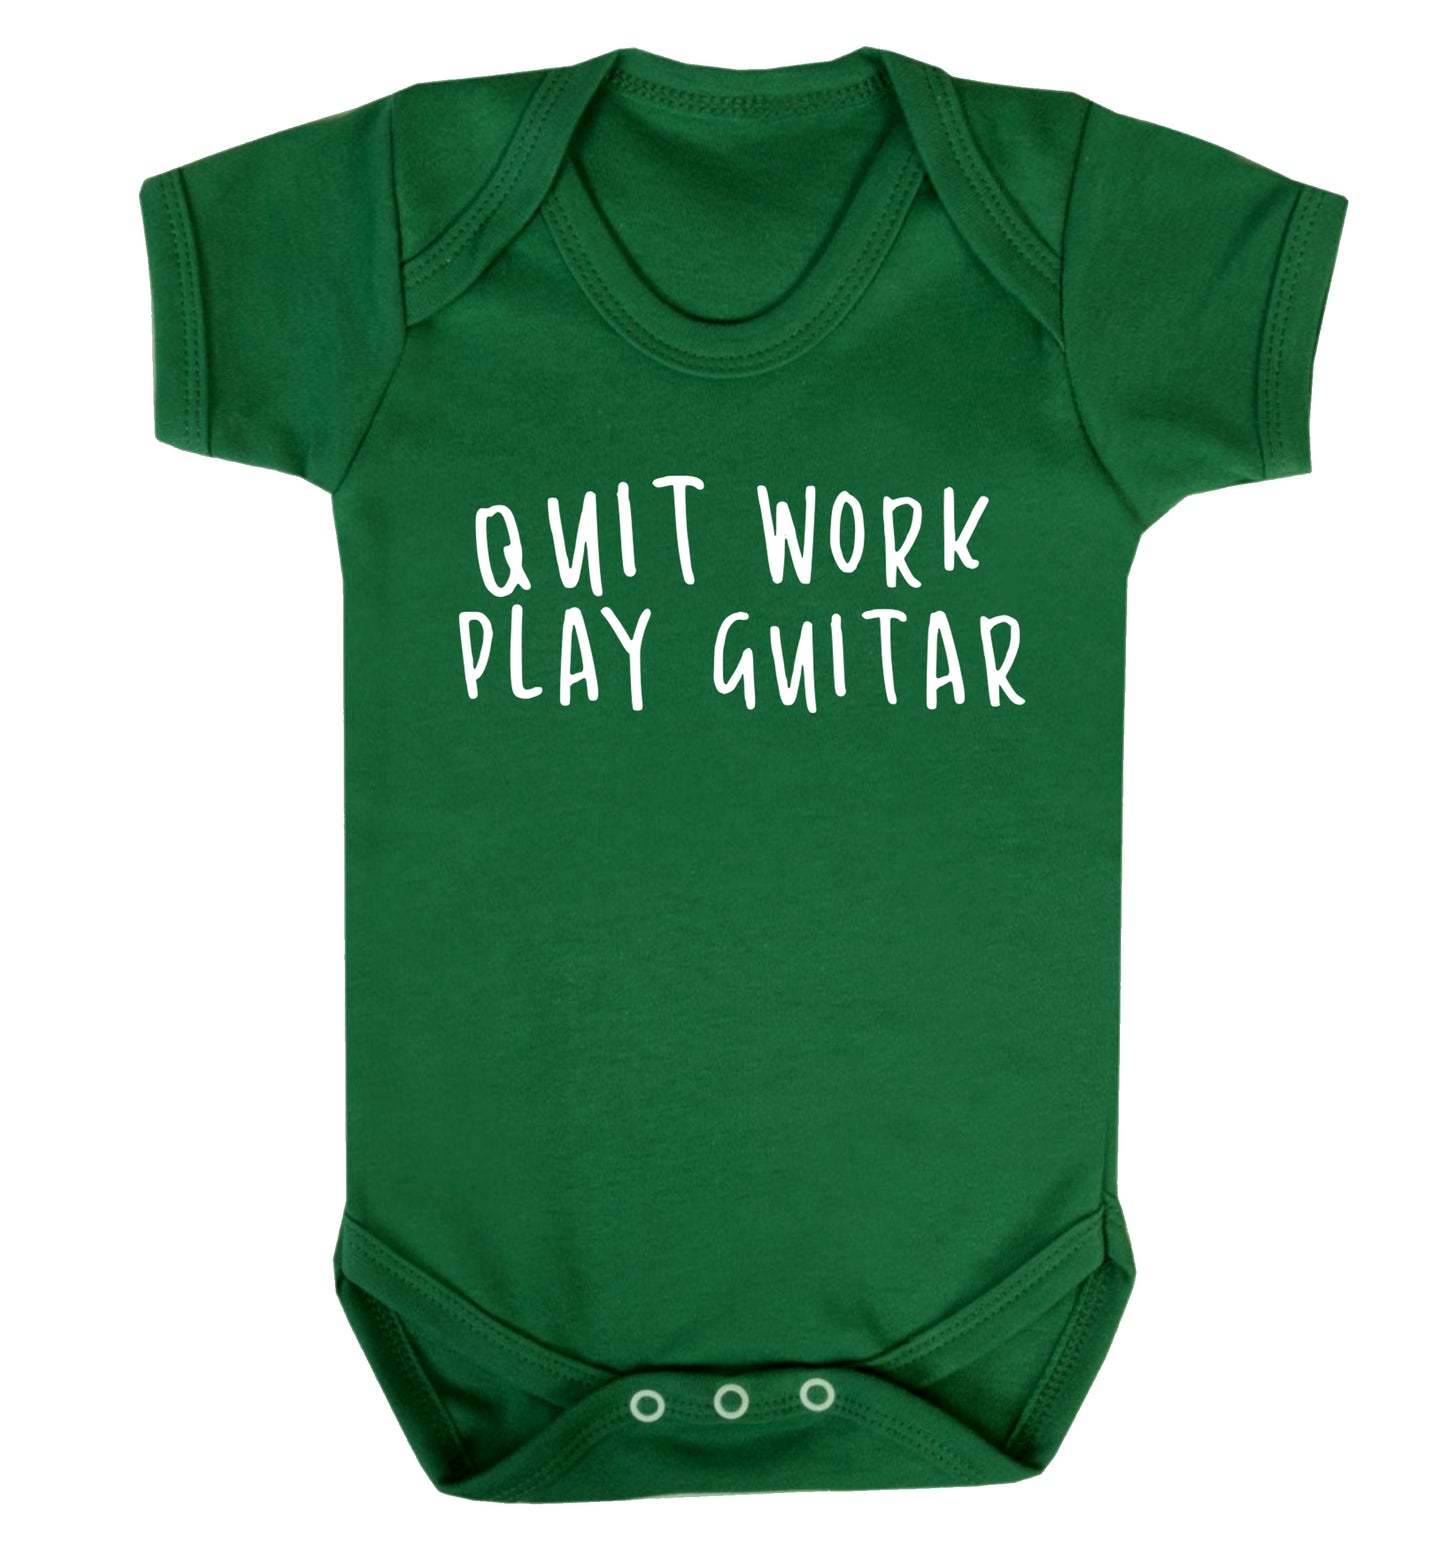 Quit work play guitar Baby Vest green 18-24 months